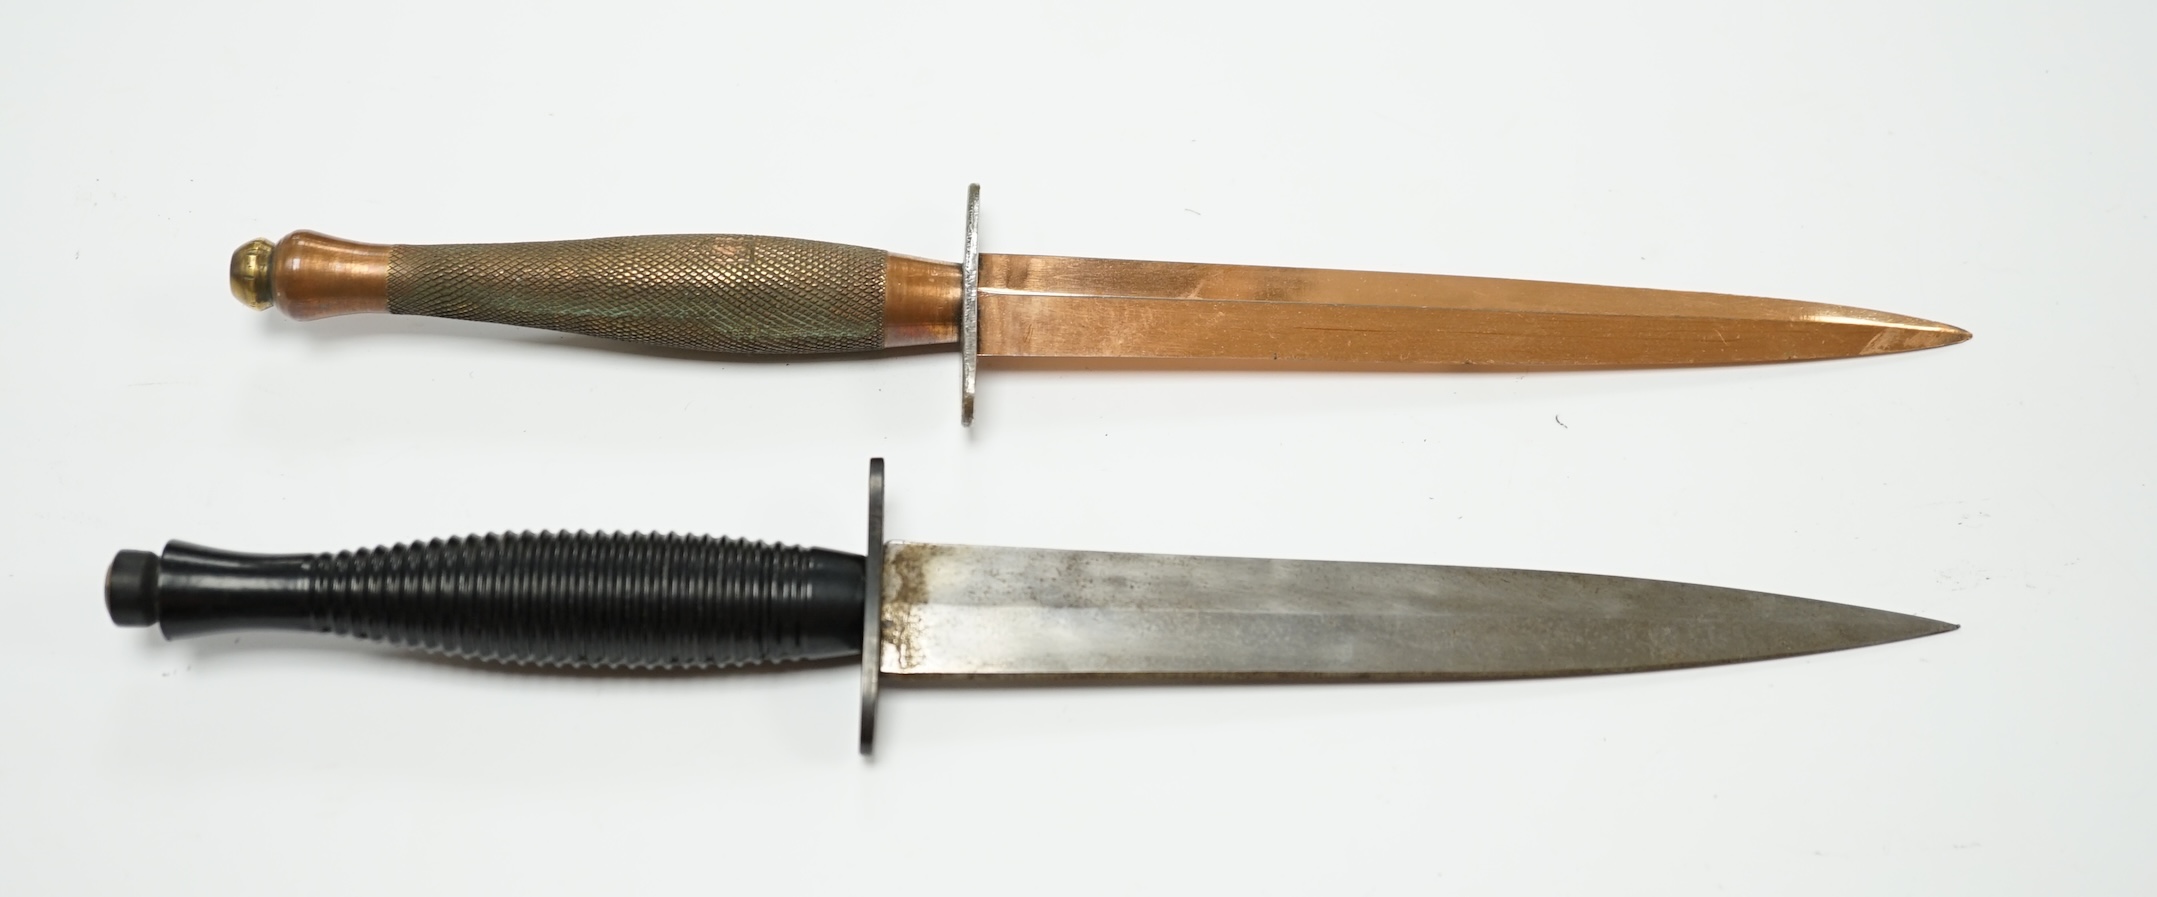 Two Fairburn Sykes style daggers, one copper plated, guard of the other stamped William Rogers, Sheffield, England. Condition - good